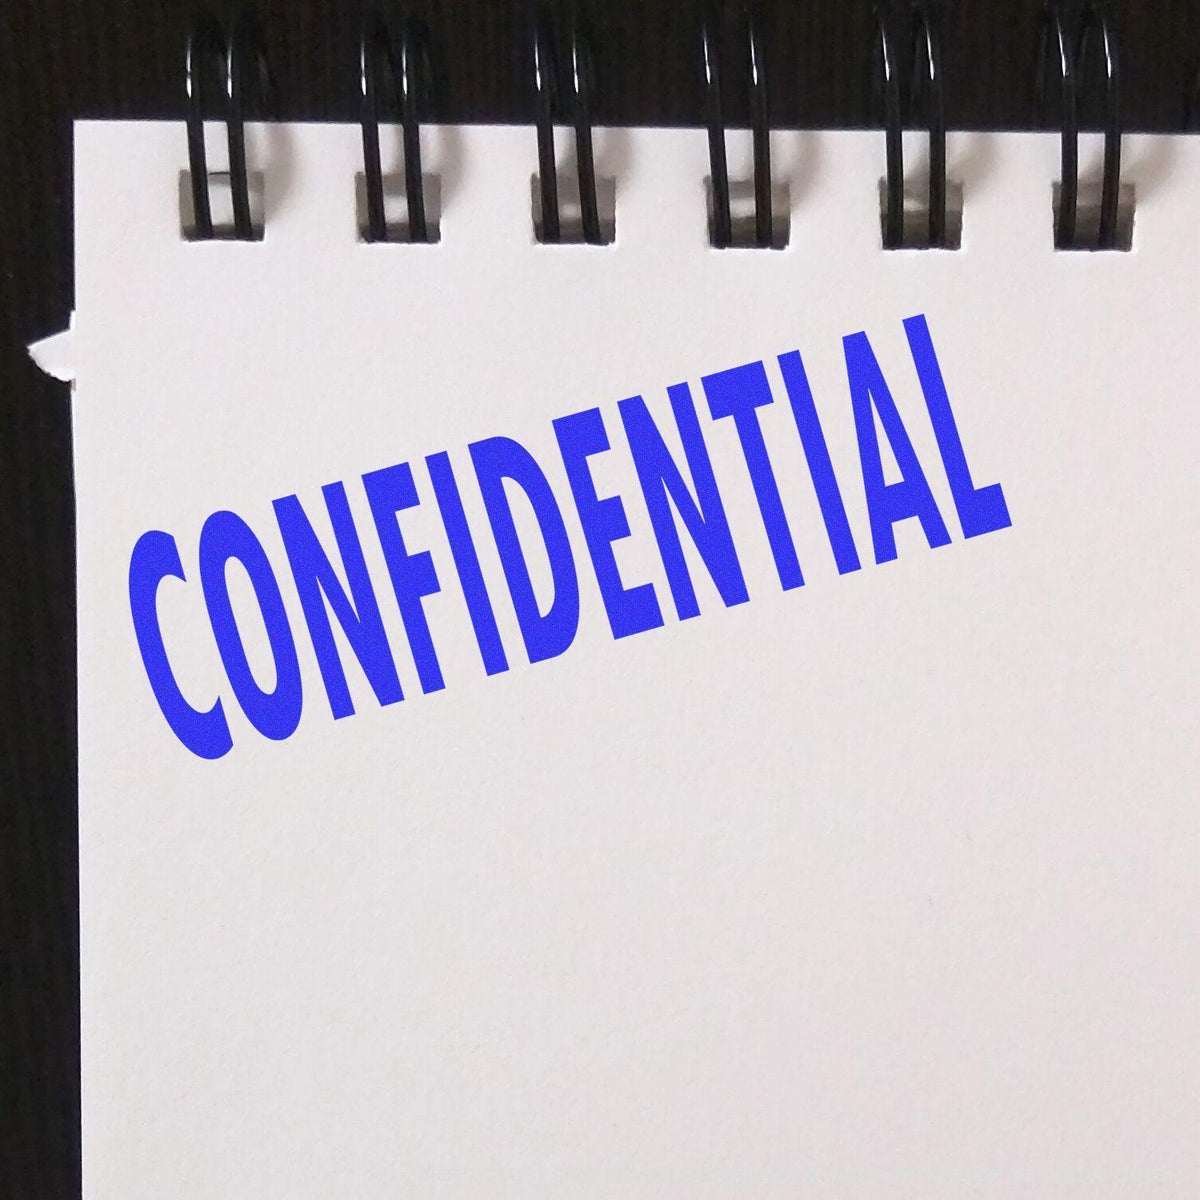 Large Self Inking Confidential Stamp In Use Photo